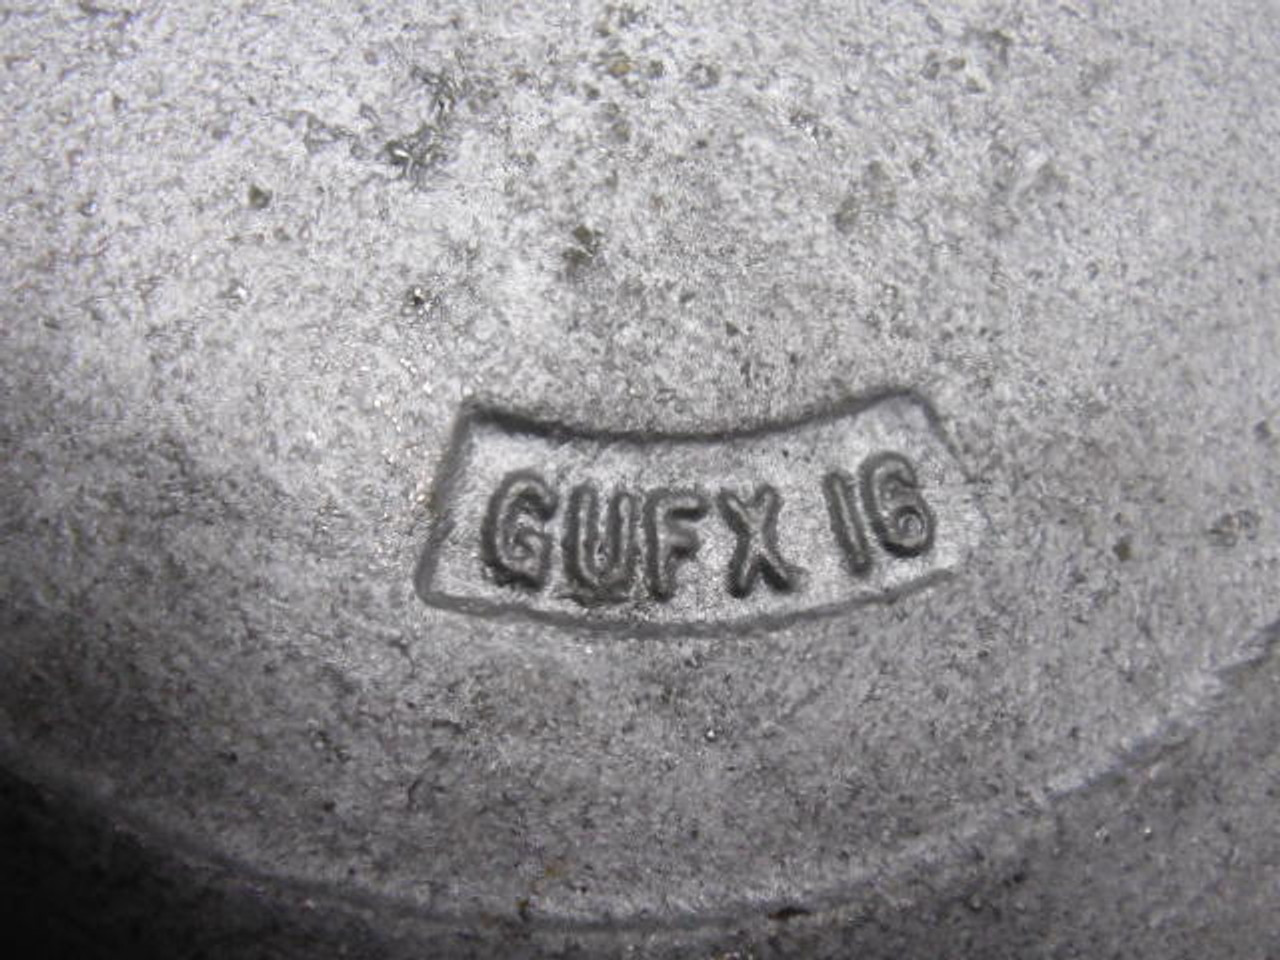 Crouse-Hinds GUFX16 Explosion-Proof Conduit Outlet 1/2" USED